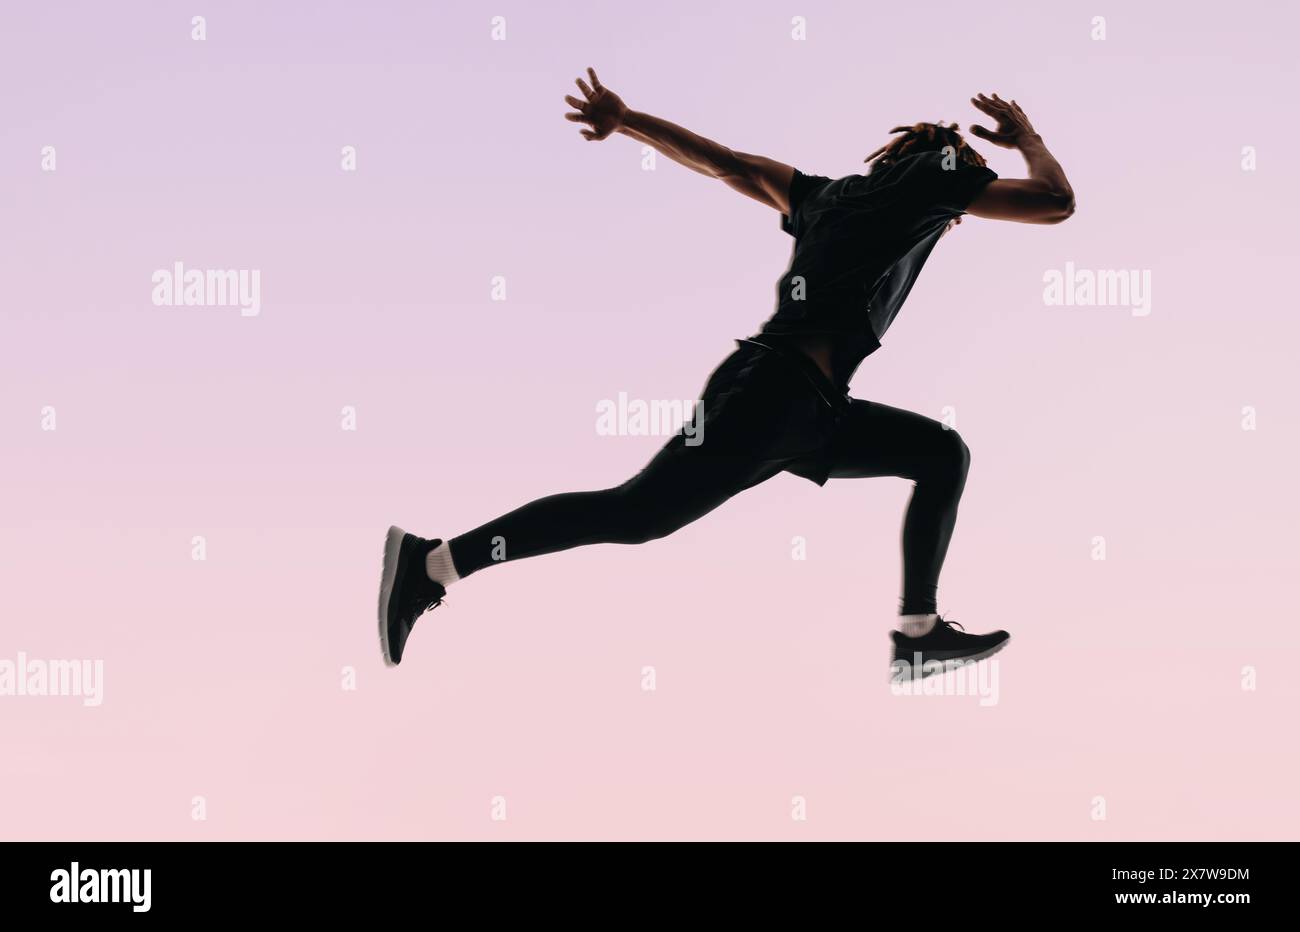 Fit man with dreadlocks jumps mid-air, showcasing his dedication to fitness. Against a pink background, he practices running and sprints in sportswear Stock Photo